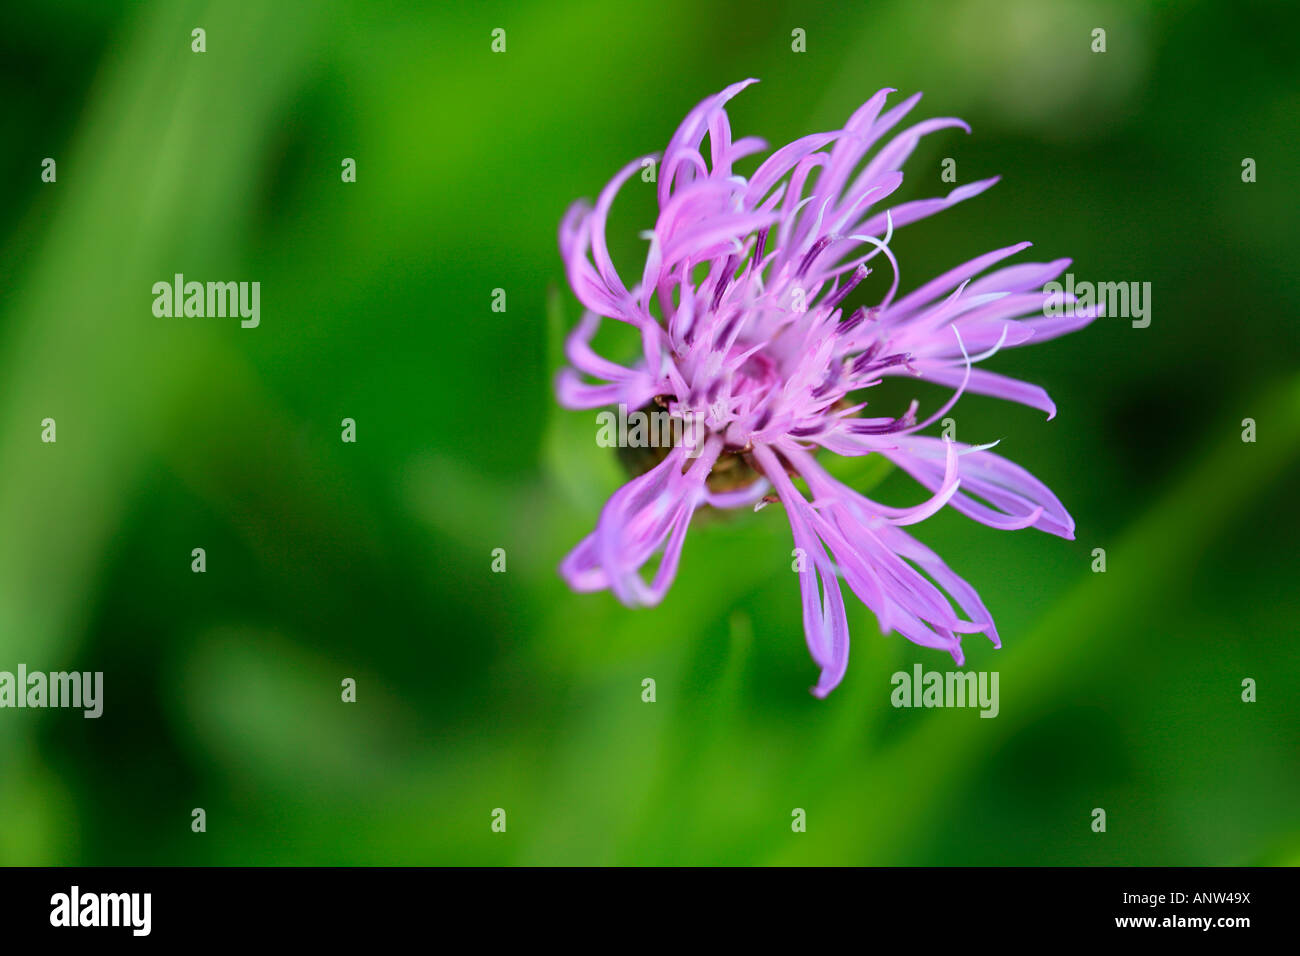 Close-up portrait of pretty purple black knapweed or common knapweed flower (Centaurea nigra) in summer meadow with blurred green background Stock Photo